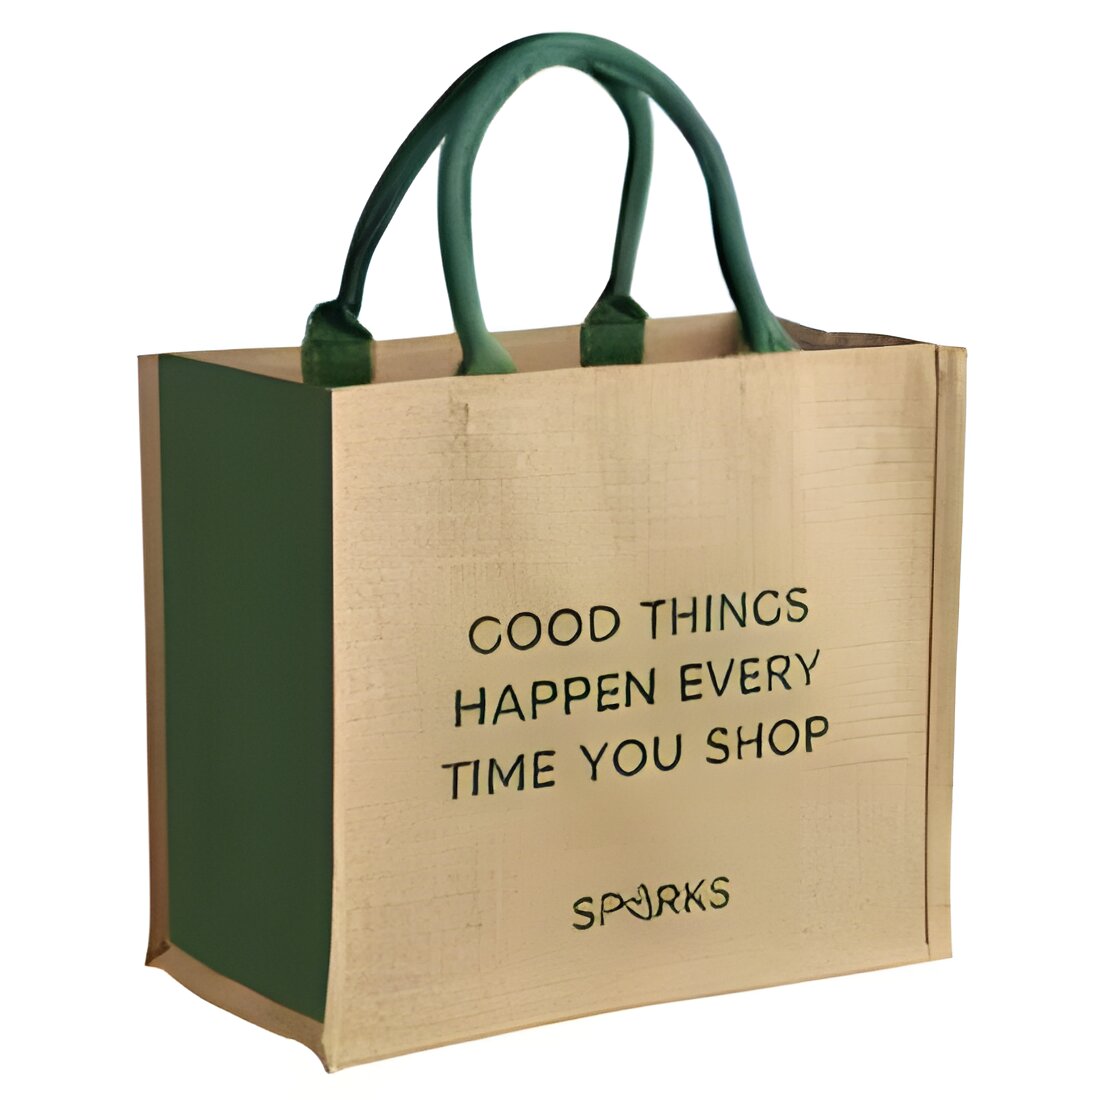 Free M&S Sparks Tote Bag